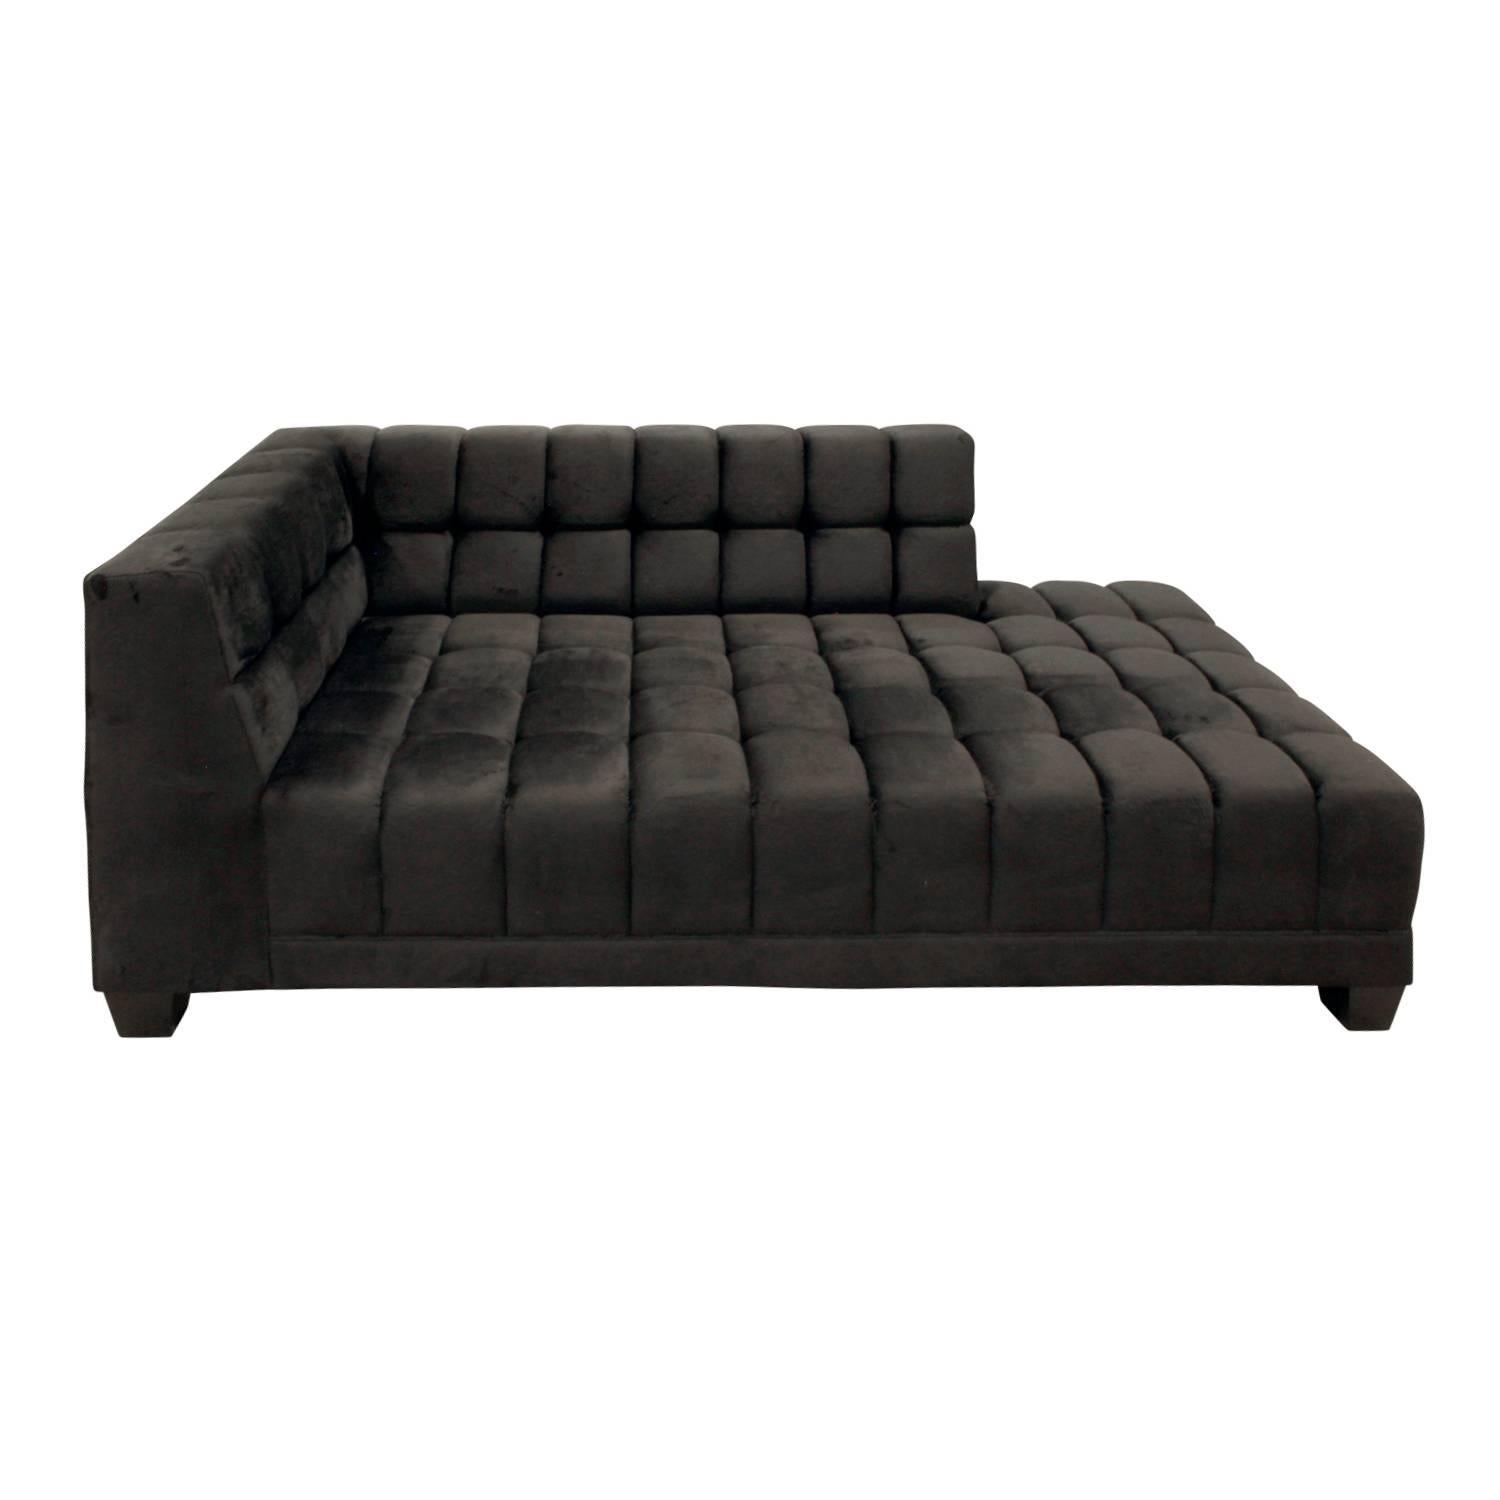 Lobel Originals "Box Tufted Chaise" Made to Order For Sale